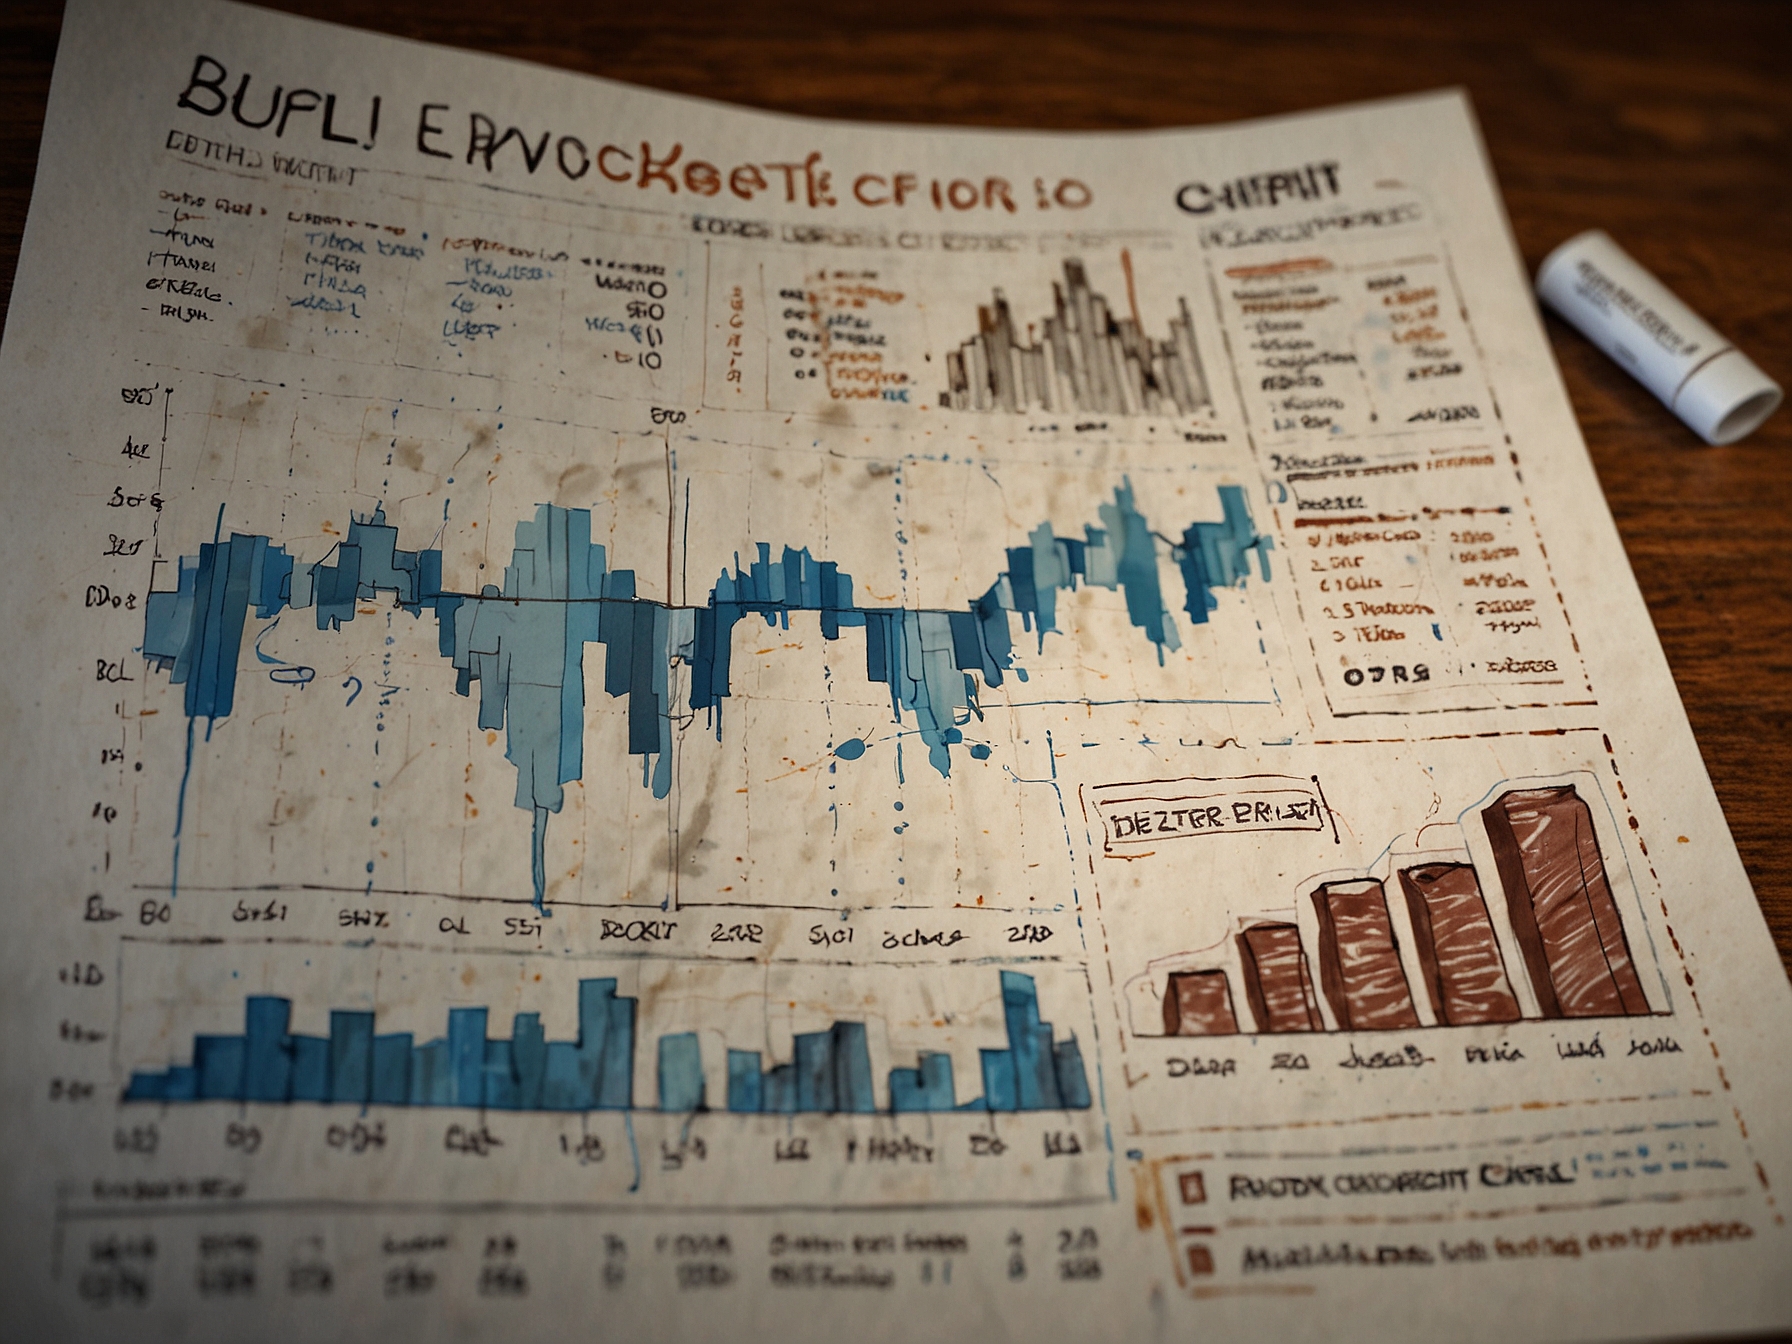 An illustration showing a graph of Chipotle’s stock performance alongside images of its menu items, symbolizing the company's market position and innovative strategies.